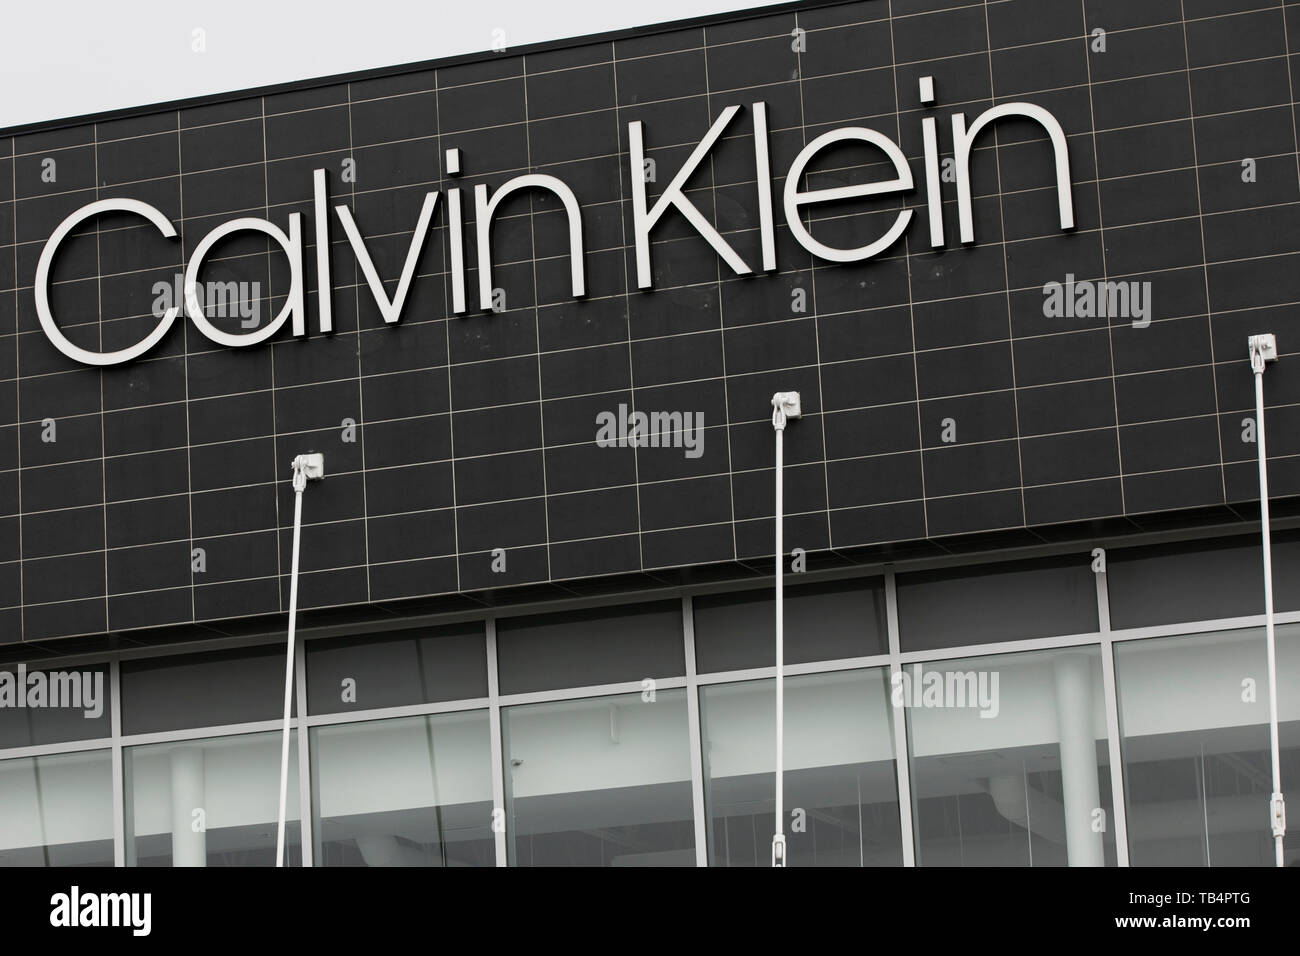 Calvin klein store hi-res stock photography and images - Alamy